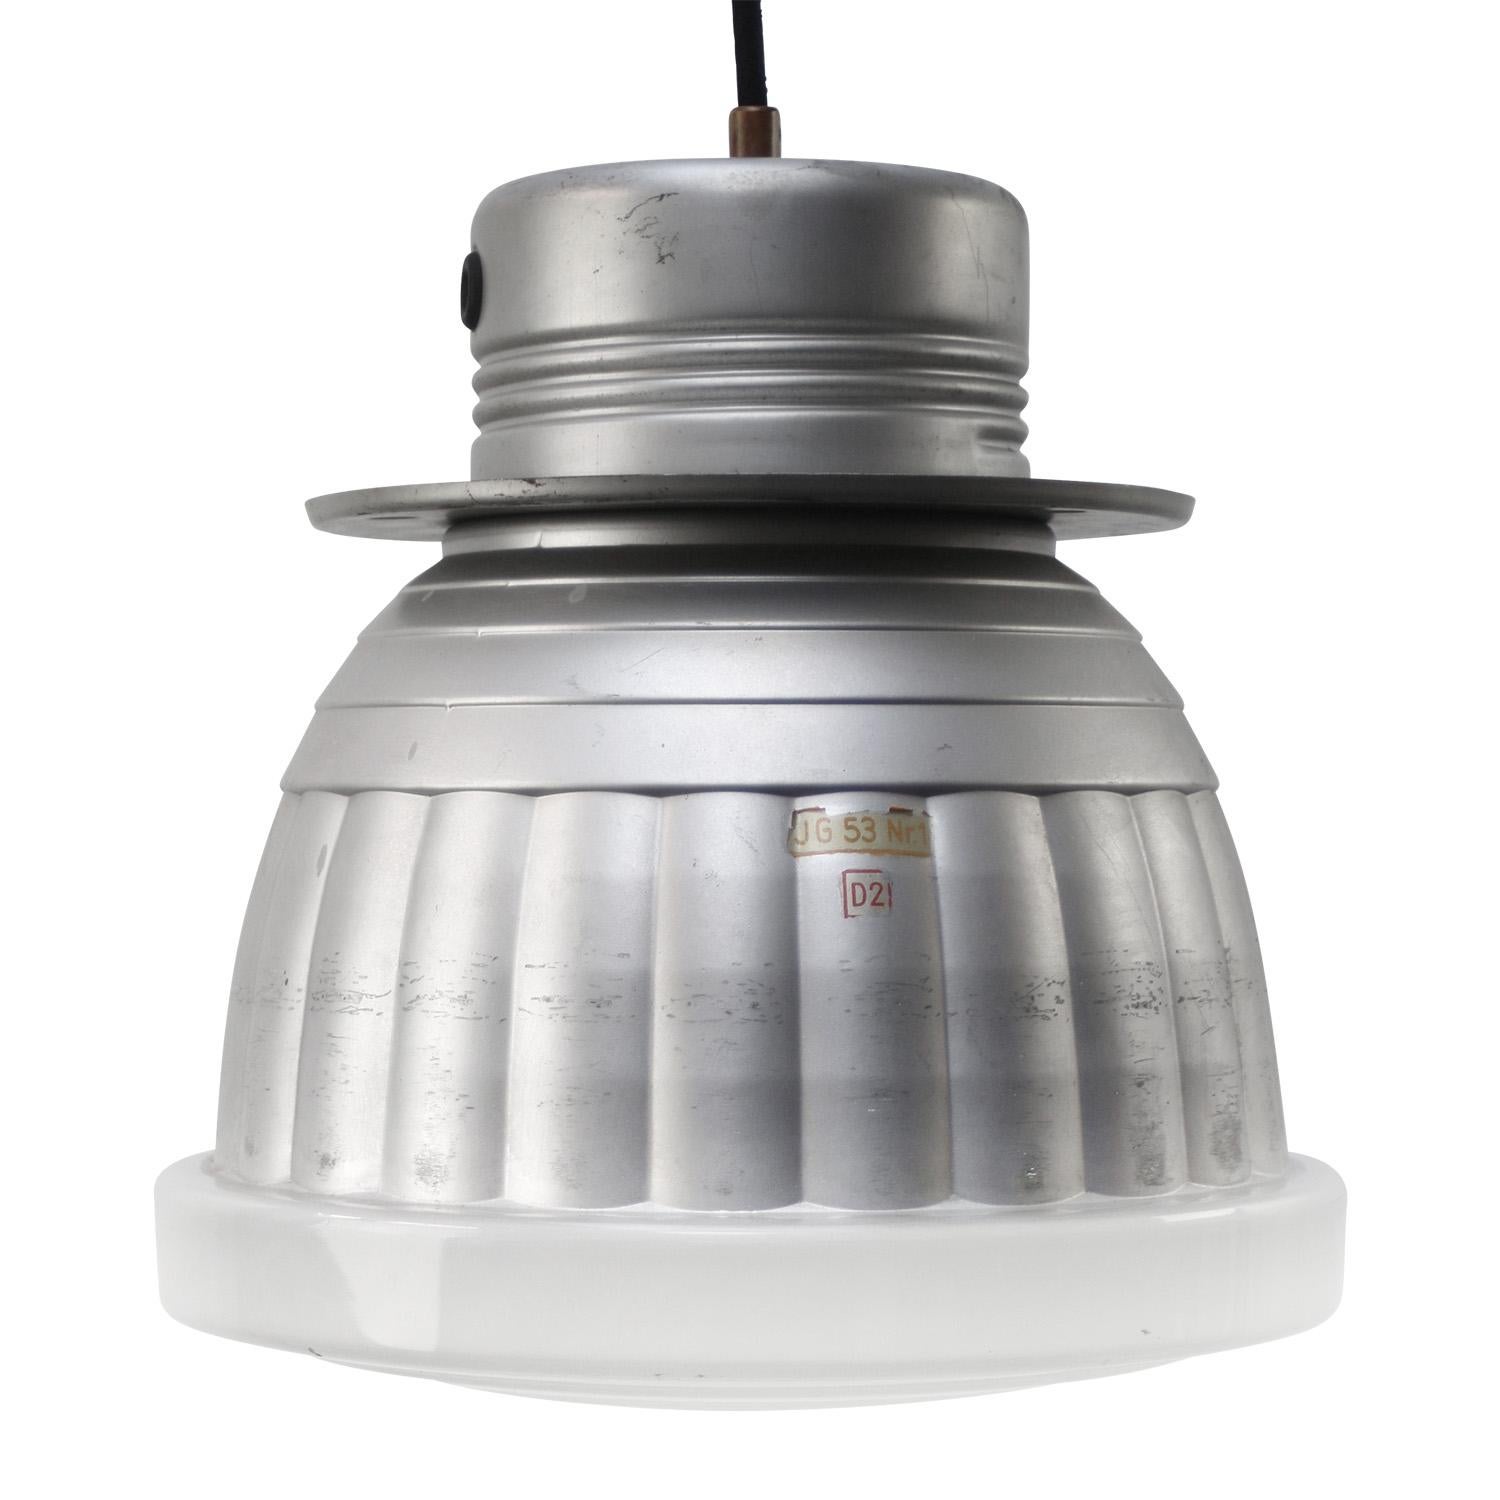 Zeiss Ikon mercury mirror glass pendant by Adolf Meyer
Metal top

Weight: 2.60 kg / 5.7 lb

Priced per individual item. All lamps have been made suitable by international standards for incandescent light bulbs, energy-efficient and LED bulbs.